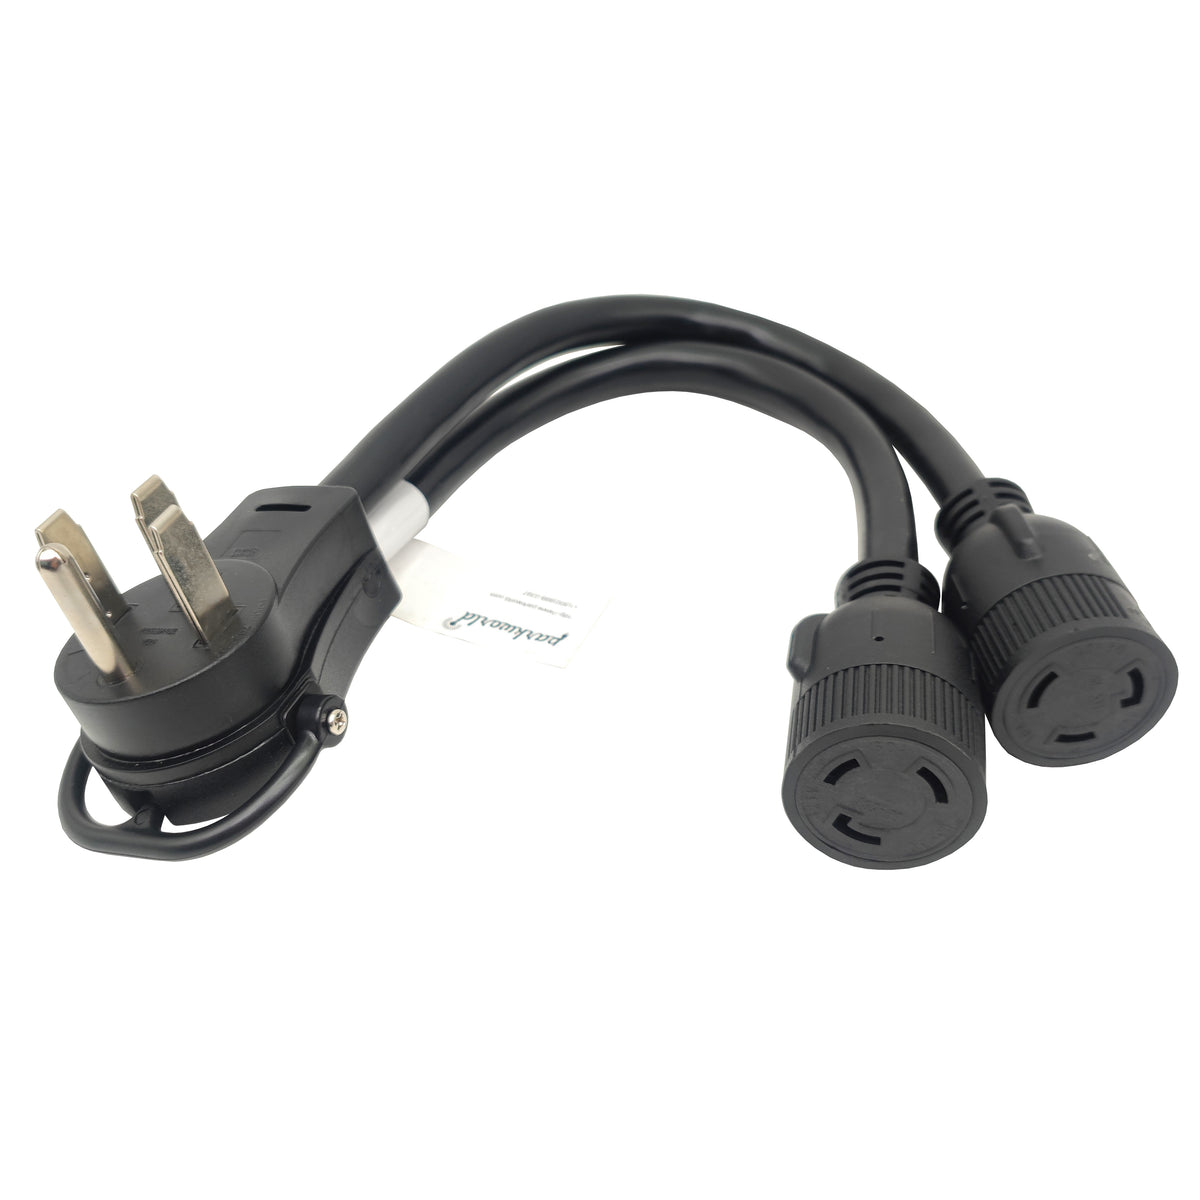 RV 50 amp shore power locking power cord, 100 ft. – EVSE Adapters